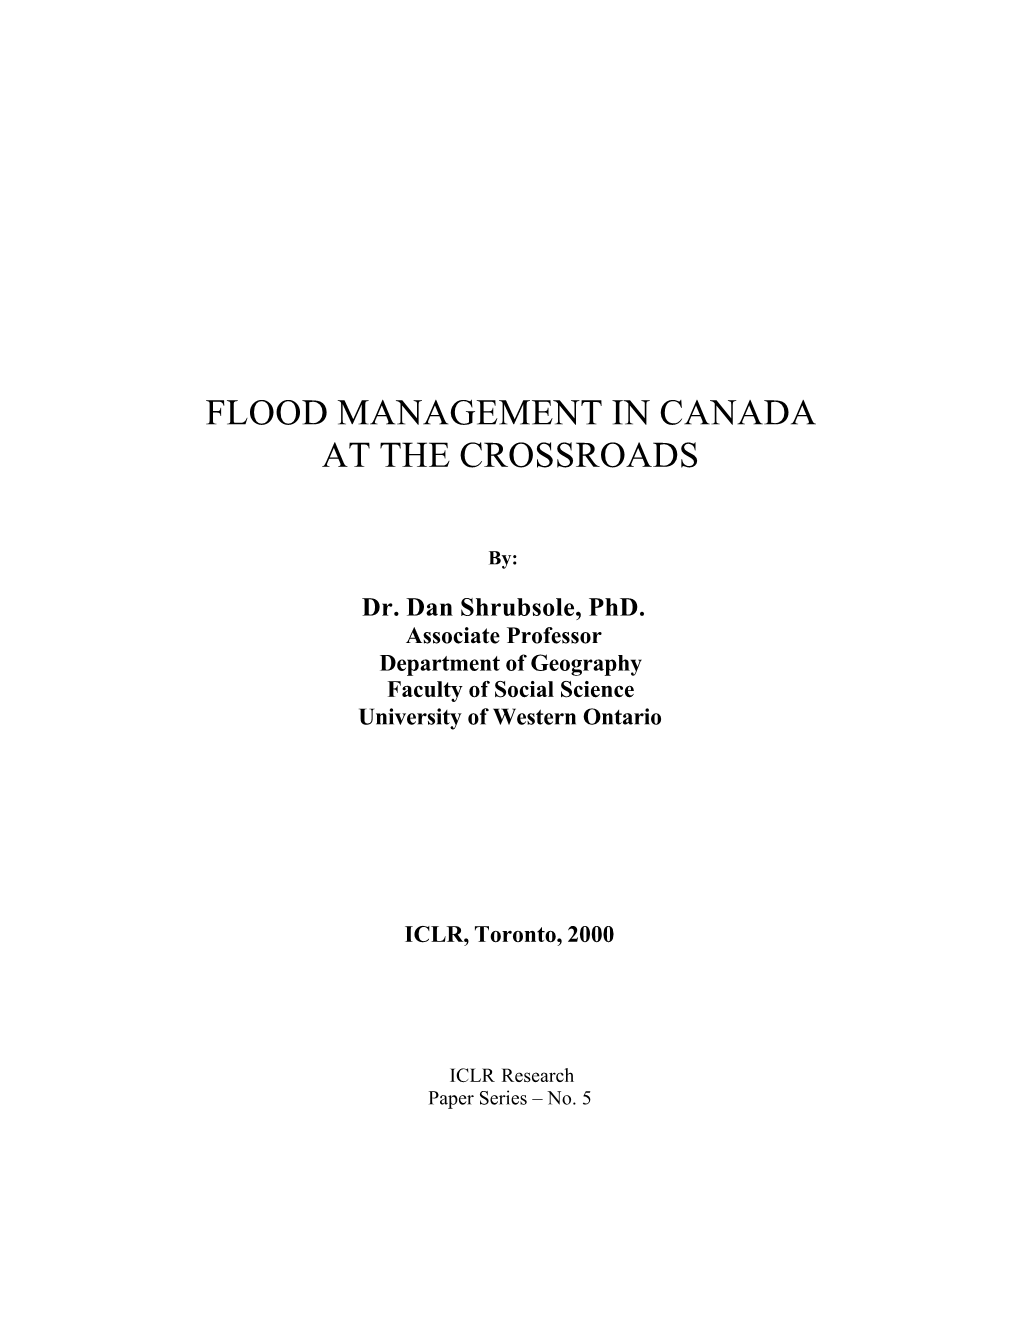 Flood Management in Canada at Thecrossroads